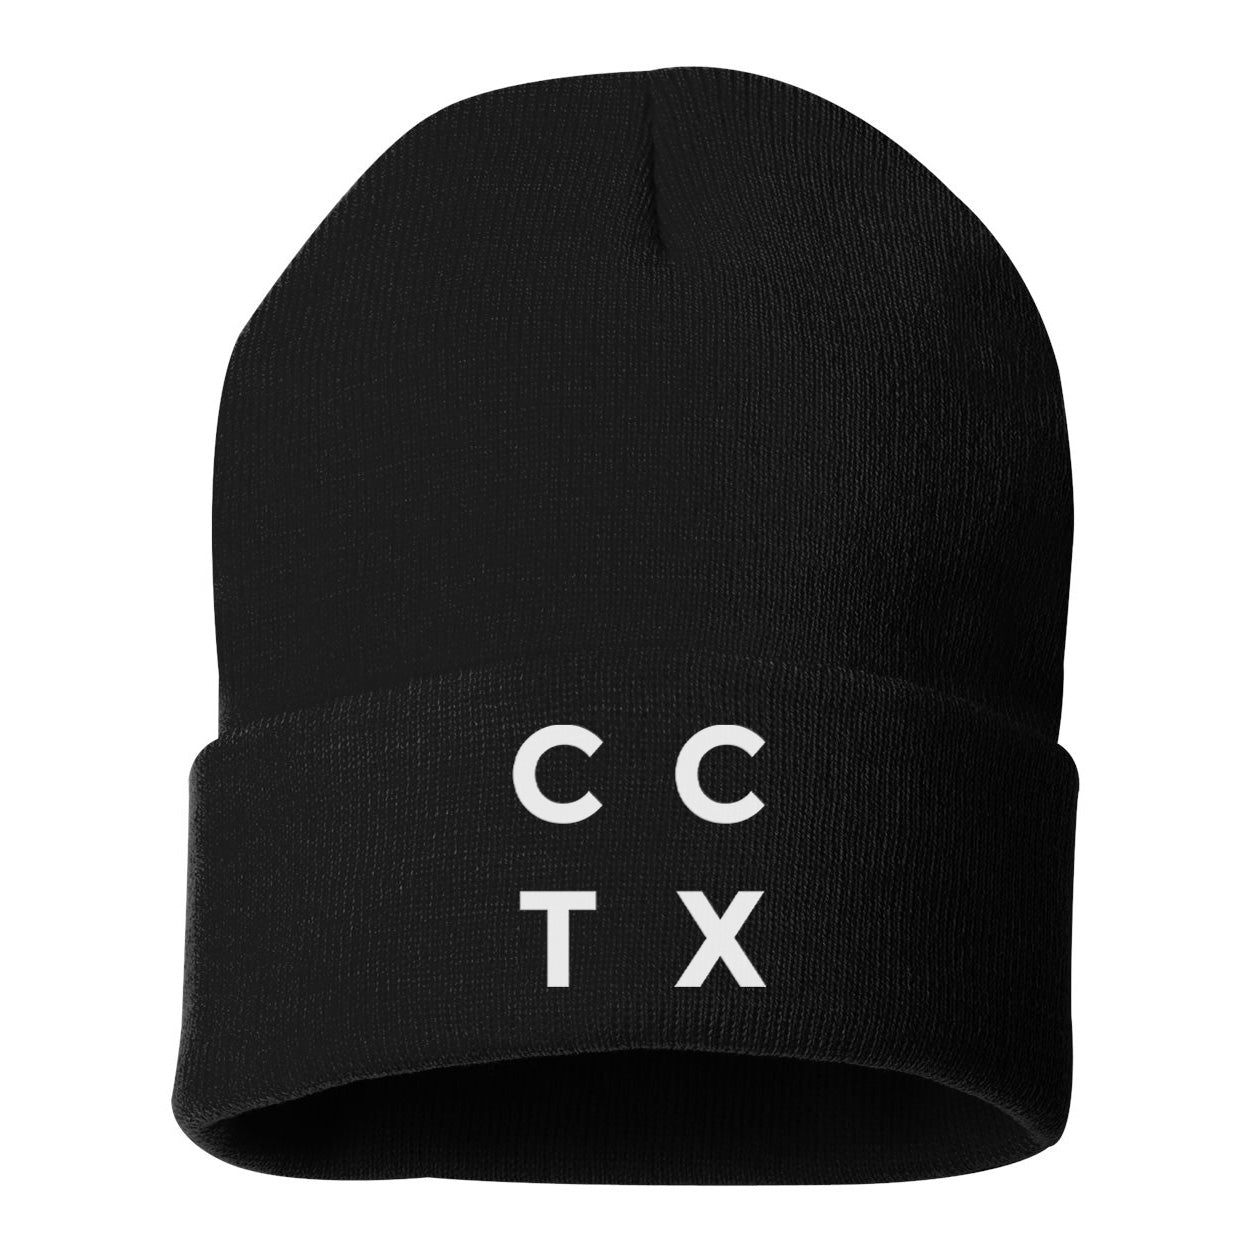 CCTX Embroidered Beanie